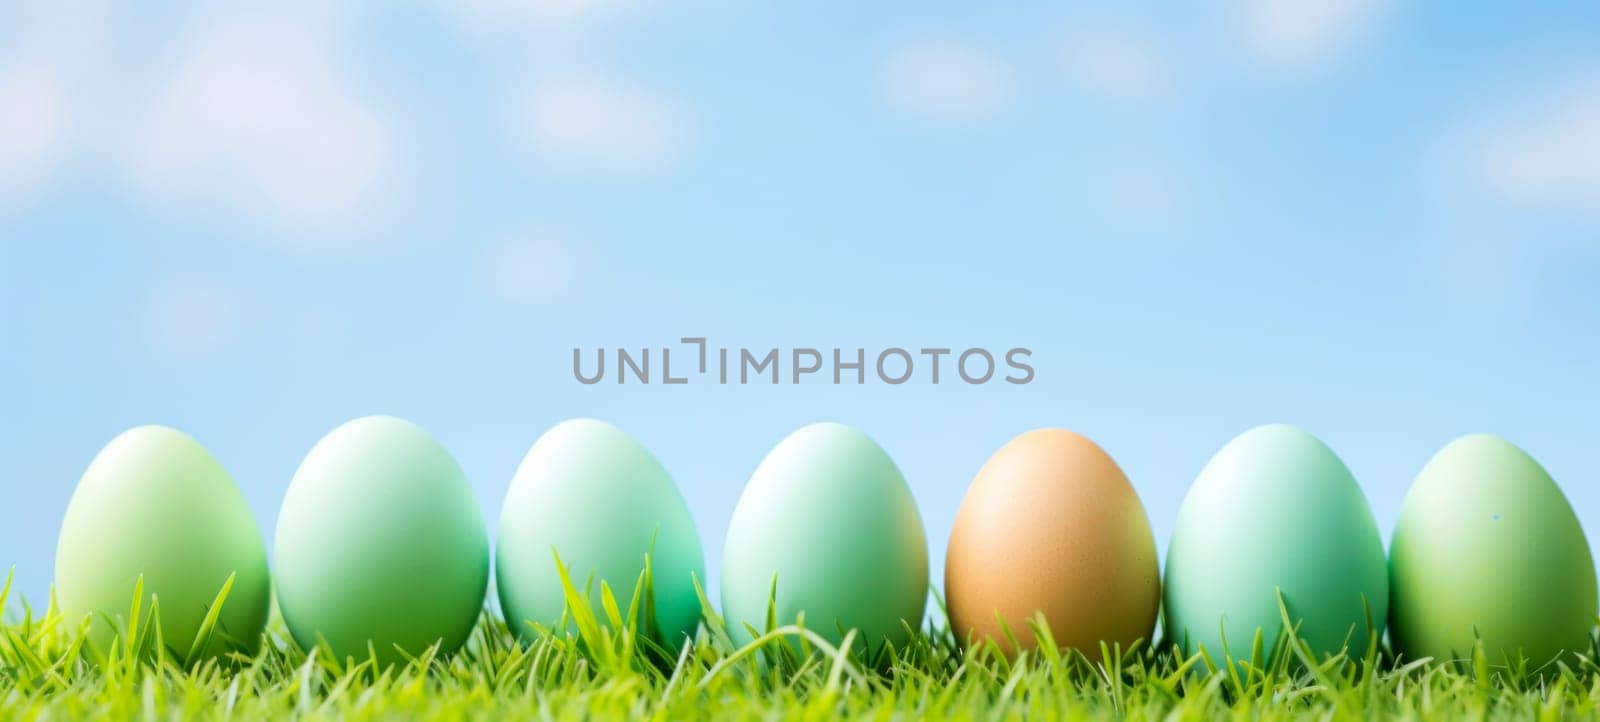 A vibrant display of colorful Easter eggs lined up in a row on lush green grass under a clear blue sky, celebrating the joy of Easter.